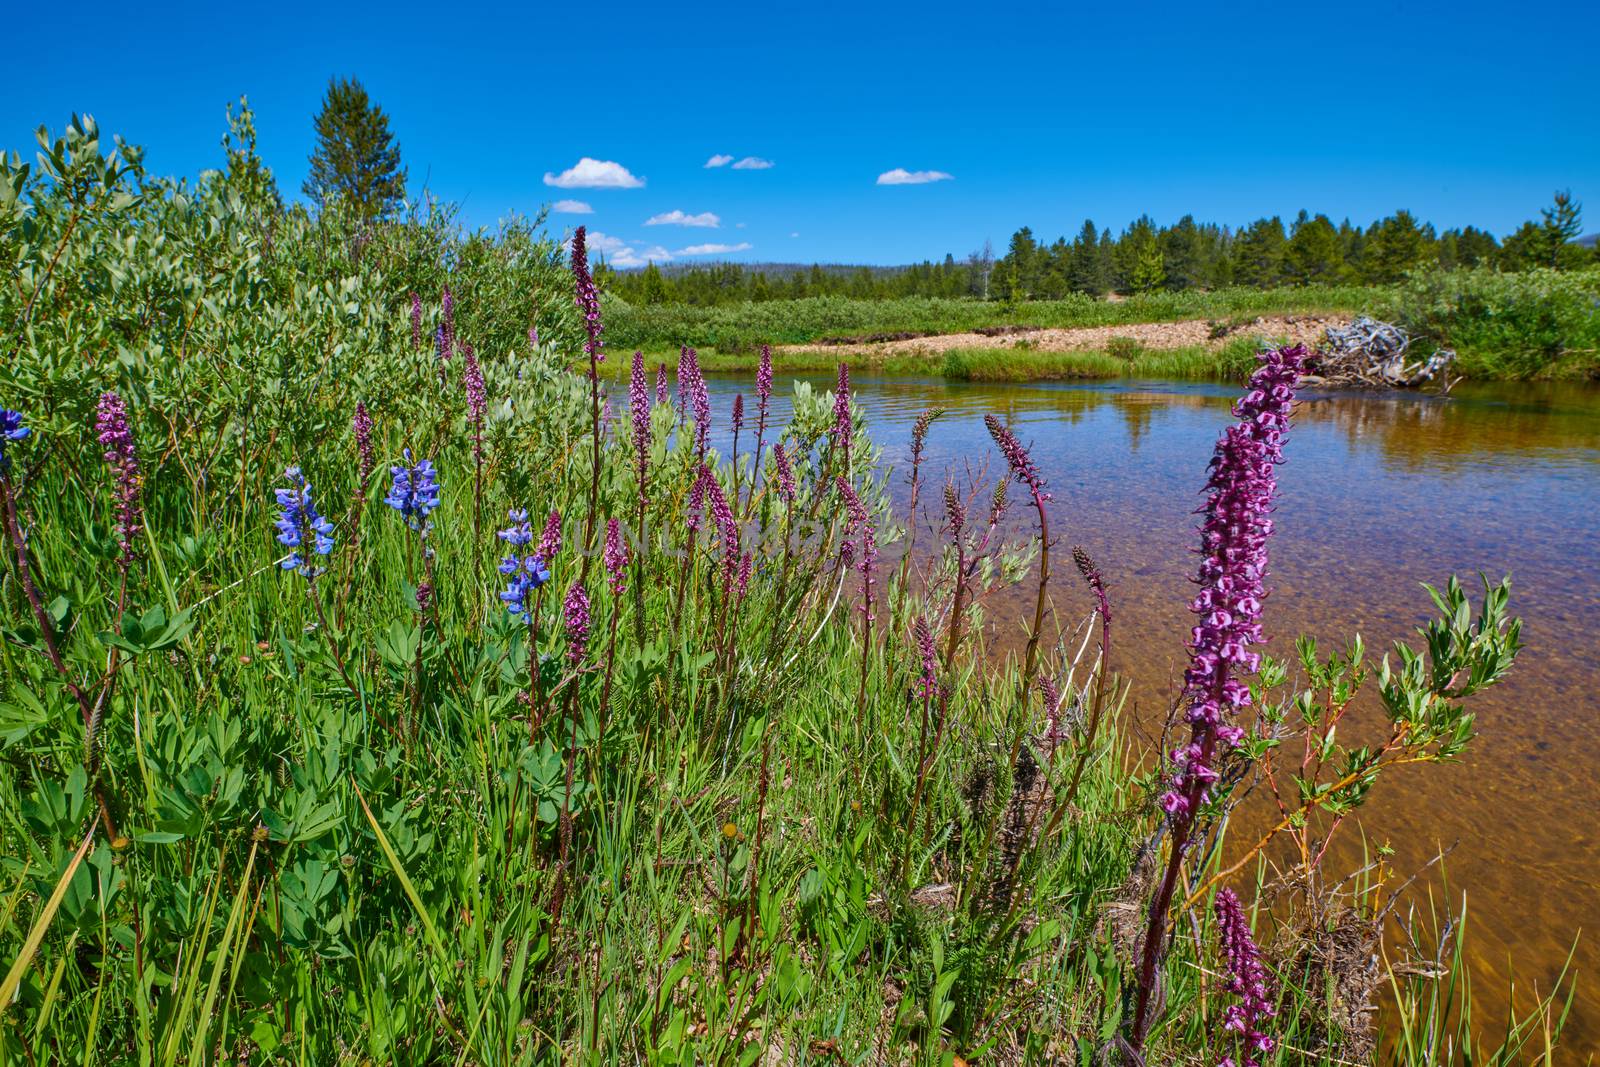 Purple Loosestrife and Payette Penstemon growing along a river bank. by patrickstock